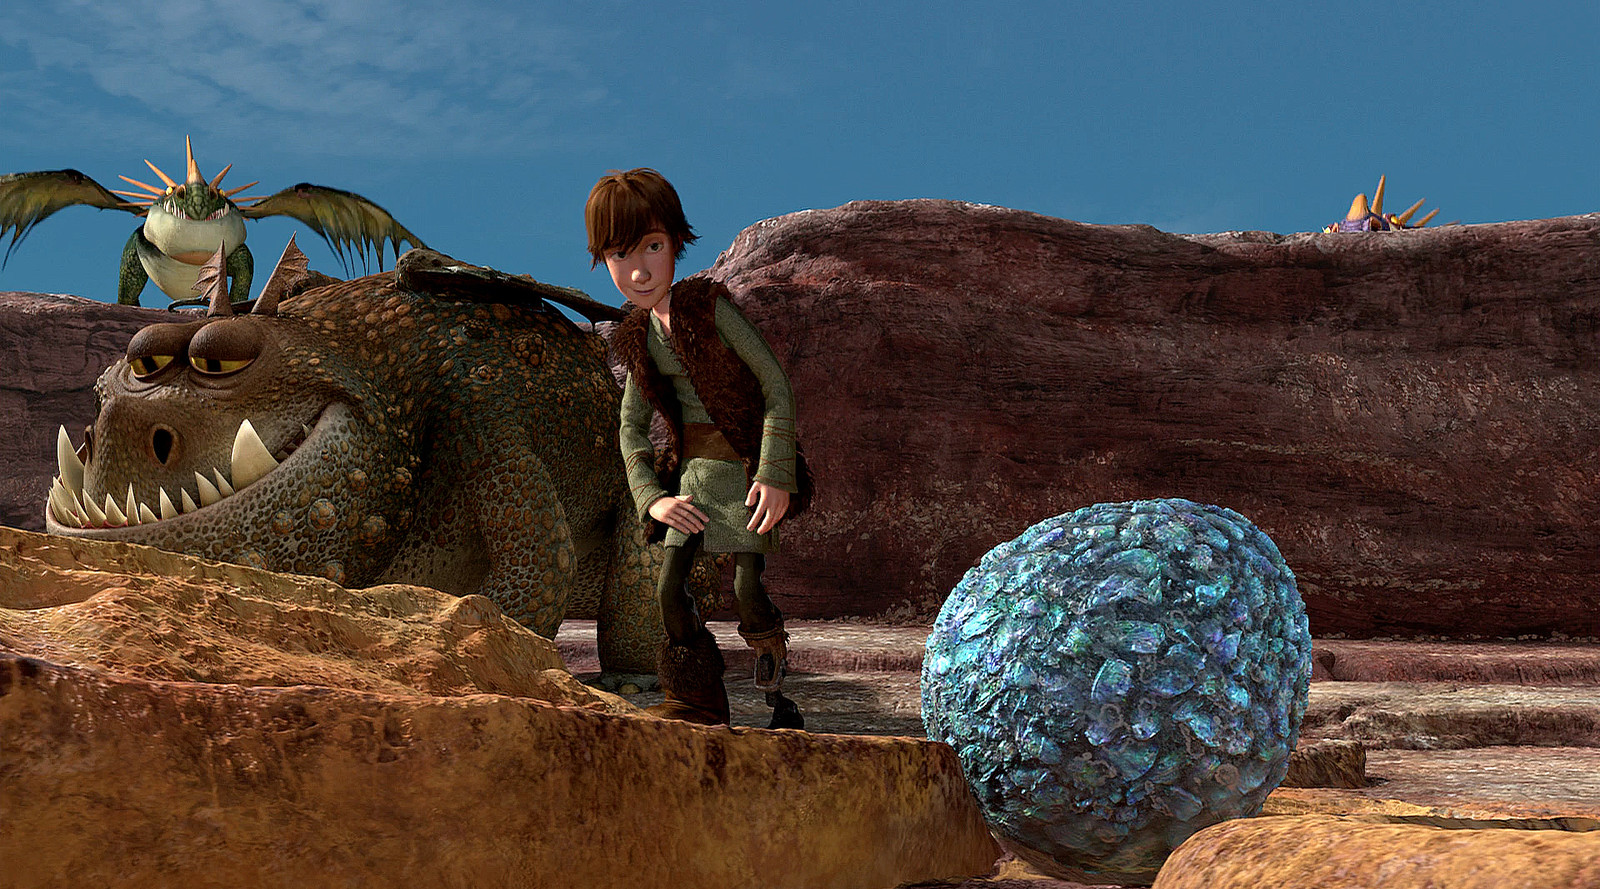 Responsible for Dragon Eggs surfacing and texturing